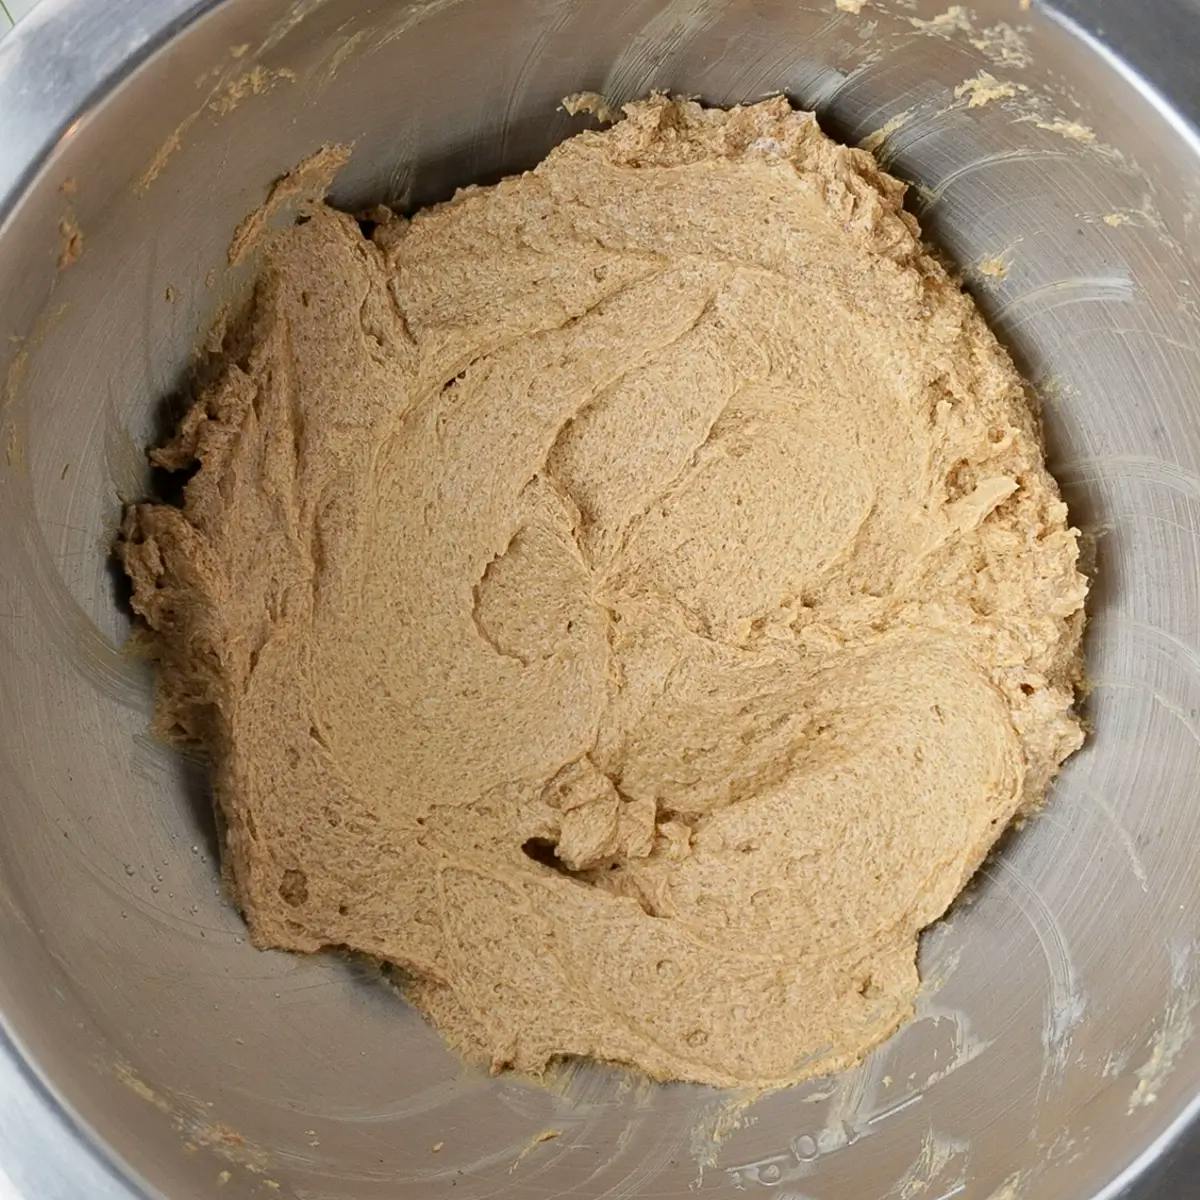 Folding dry flour mixture to batter in a vegan chocolate chip cookie recipe.